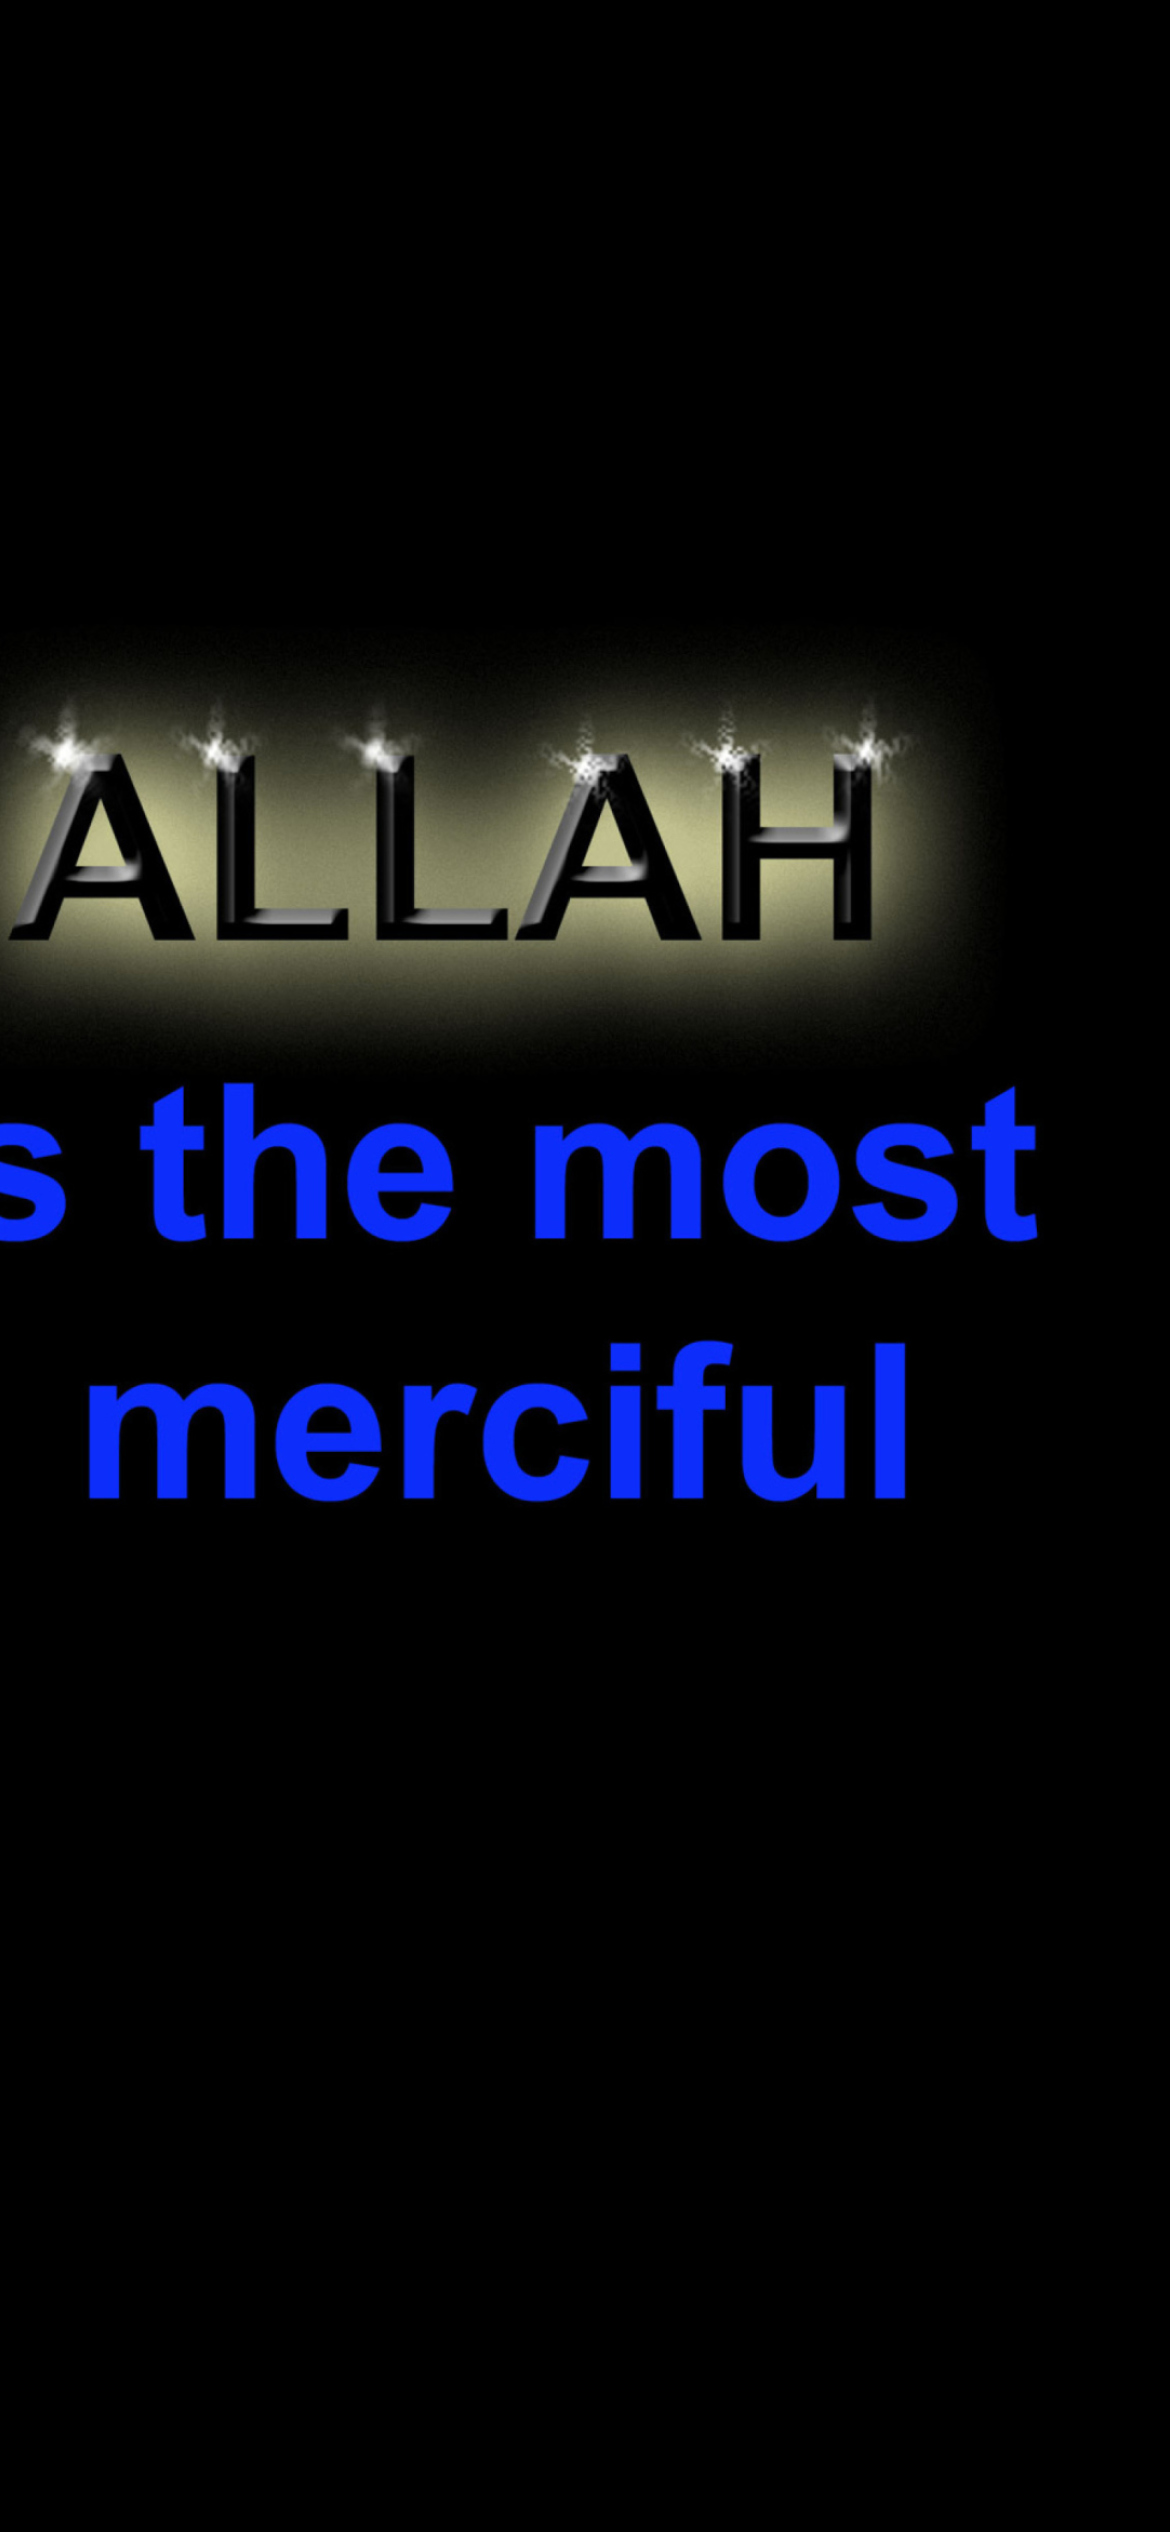 Allah Is The Most Merciful wallpaper 1170x2532